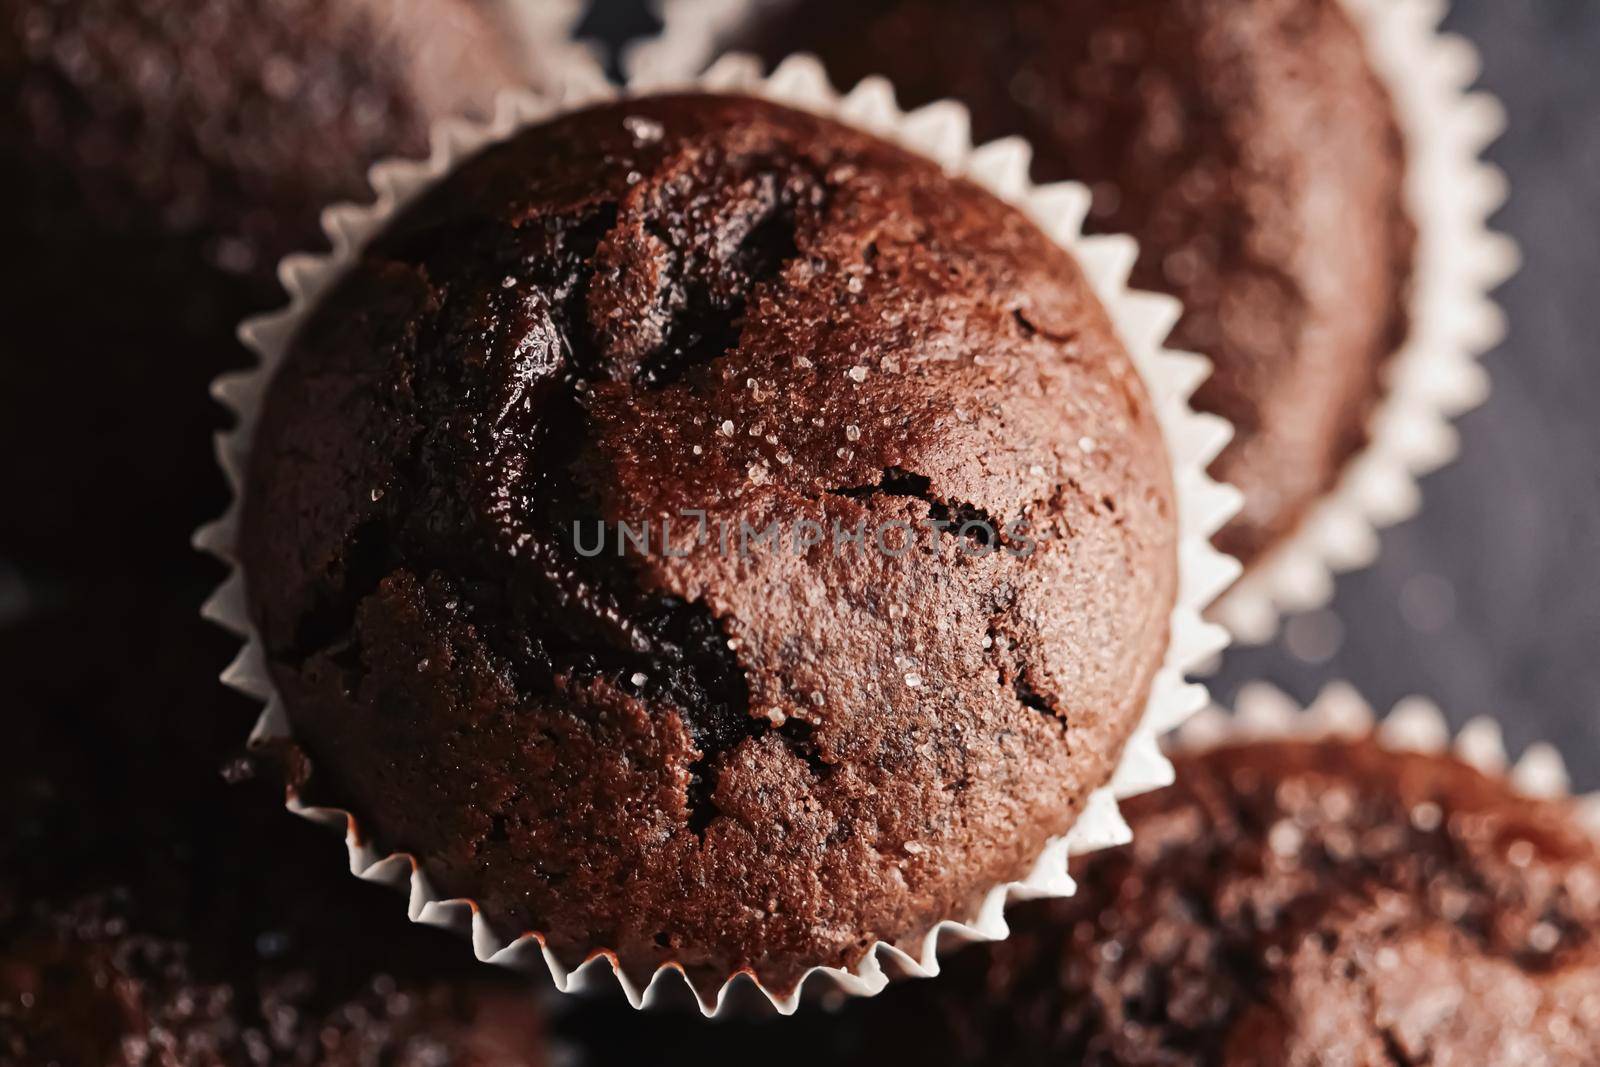 Homemade chocolate muffins, baked comfort food recipe by Anneleven